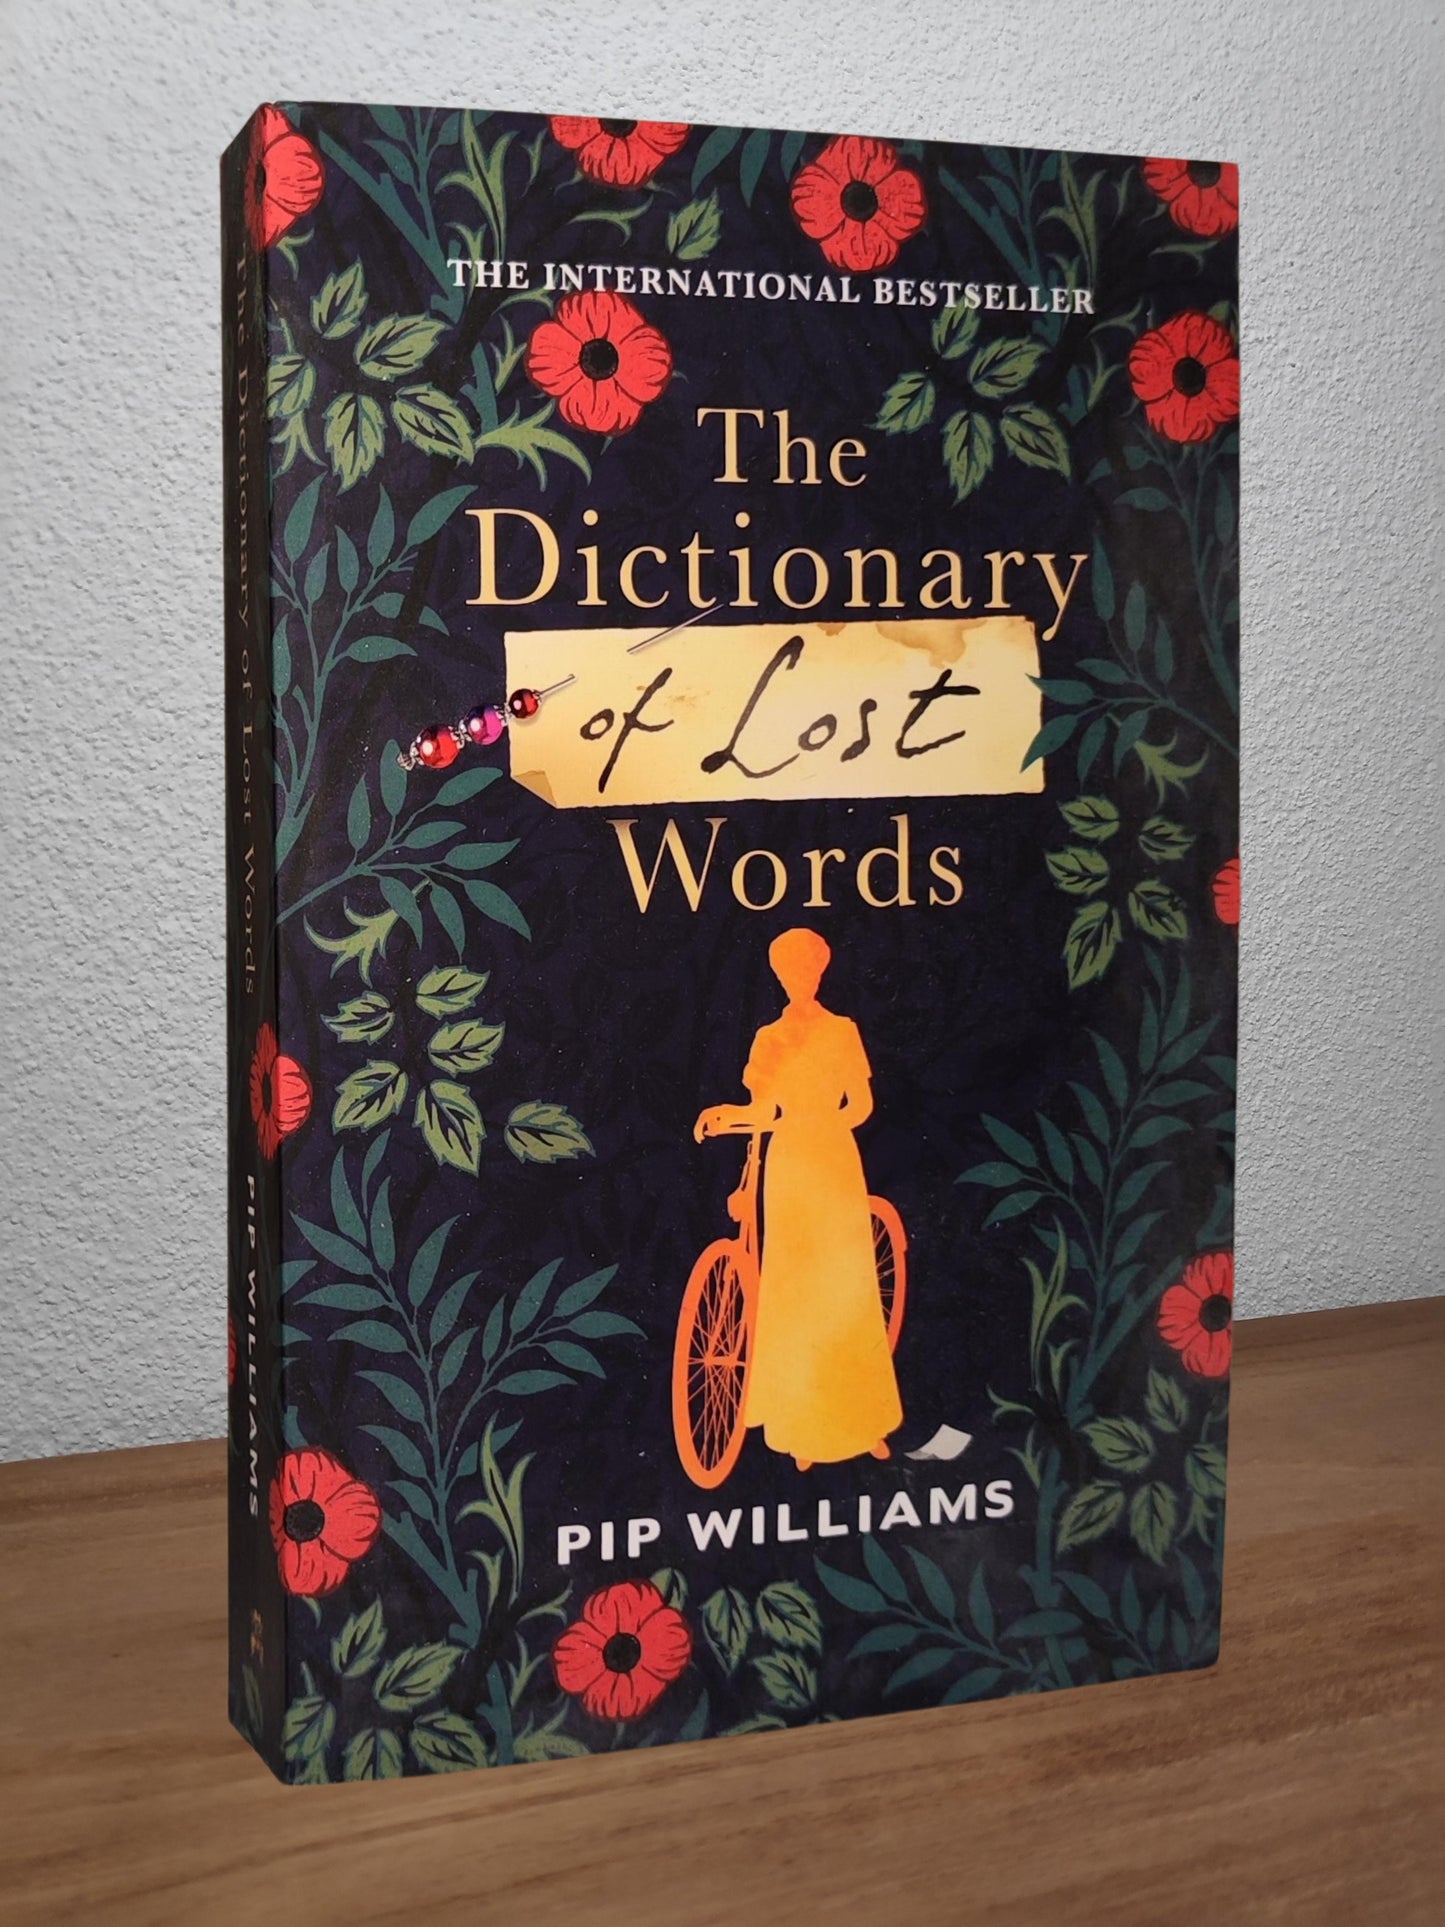 Pip Williams - The Dictionary of Lost Words - Second-hand english book to deliver in Zurich & Switzerland